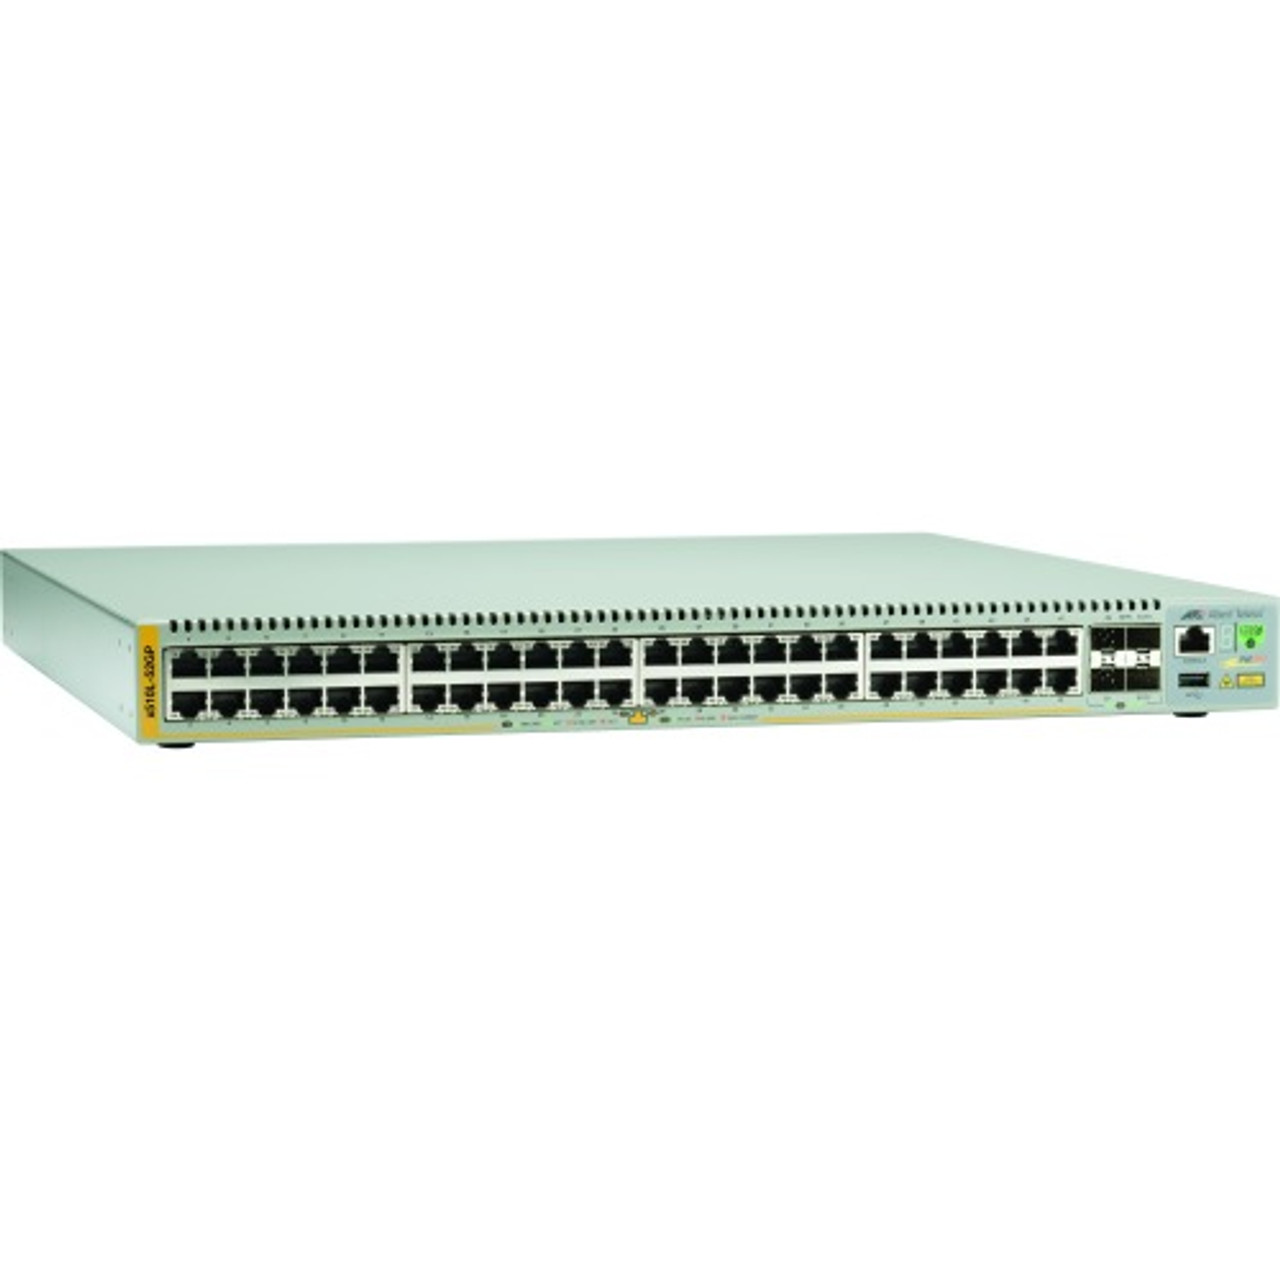 AT-X510L-52GP-10 Allied Telesis 48-Ports 10/100/1000Base-T Poe+ Layer 3 Switch with 4x SFP/SFP+ Slots Including 2x 10 Gigabit Stacking Slots (Refurbished)